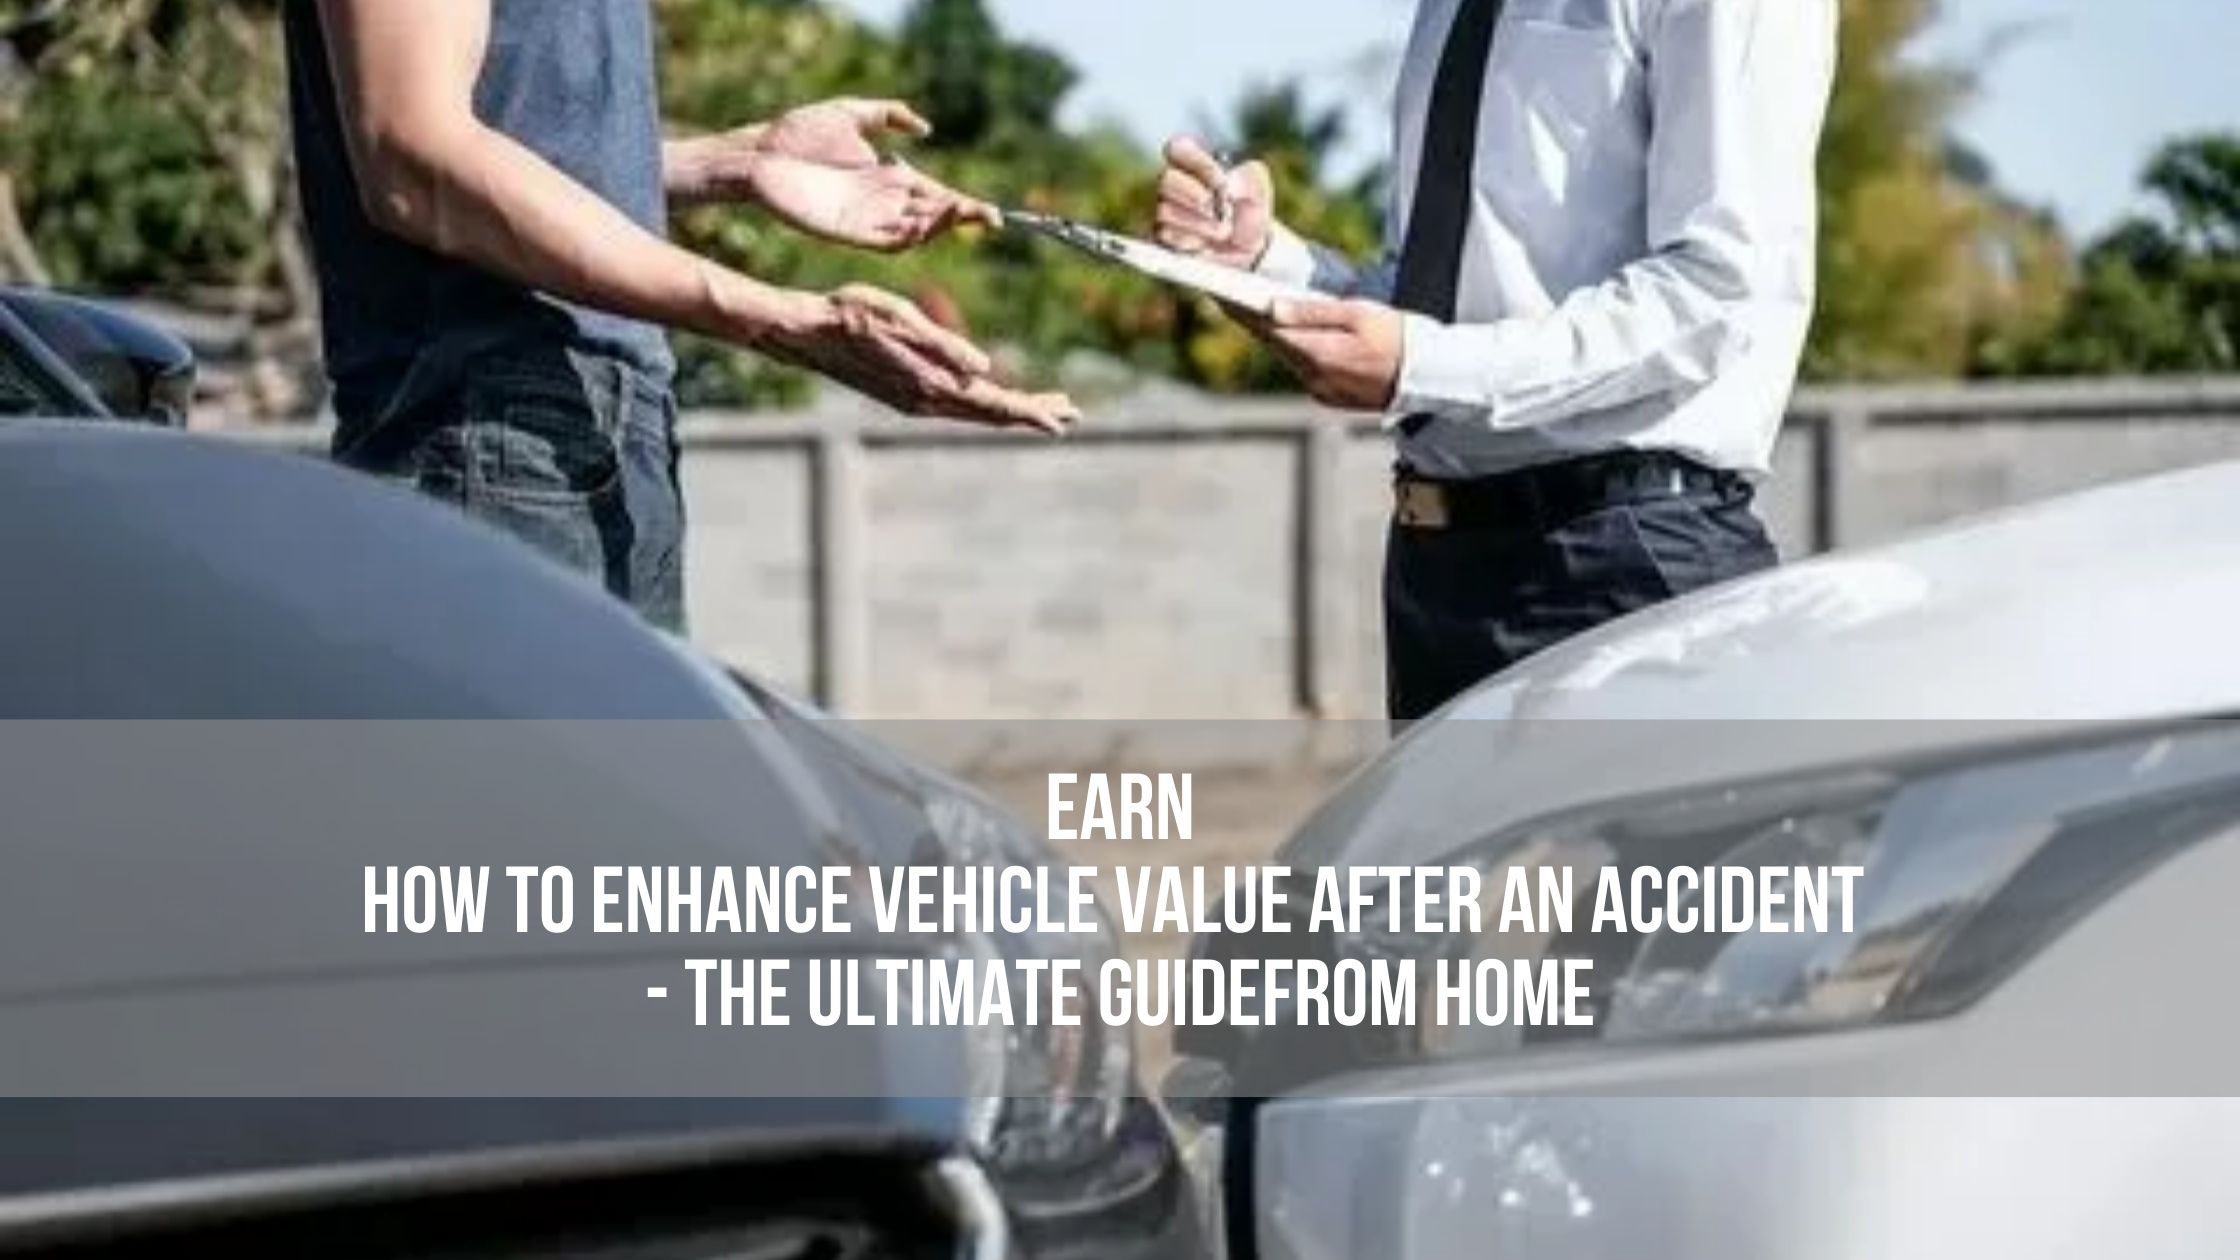 How to Enhance Vehicle Value After an Accident